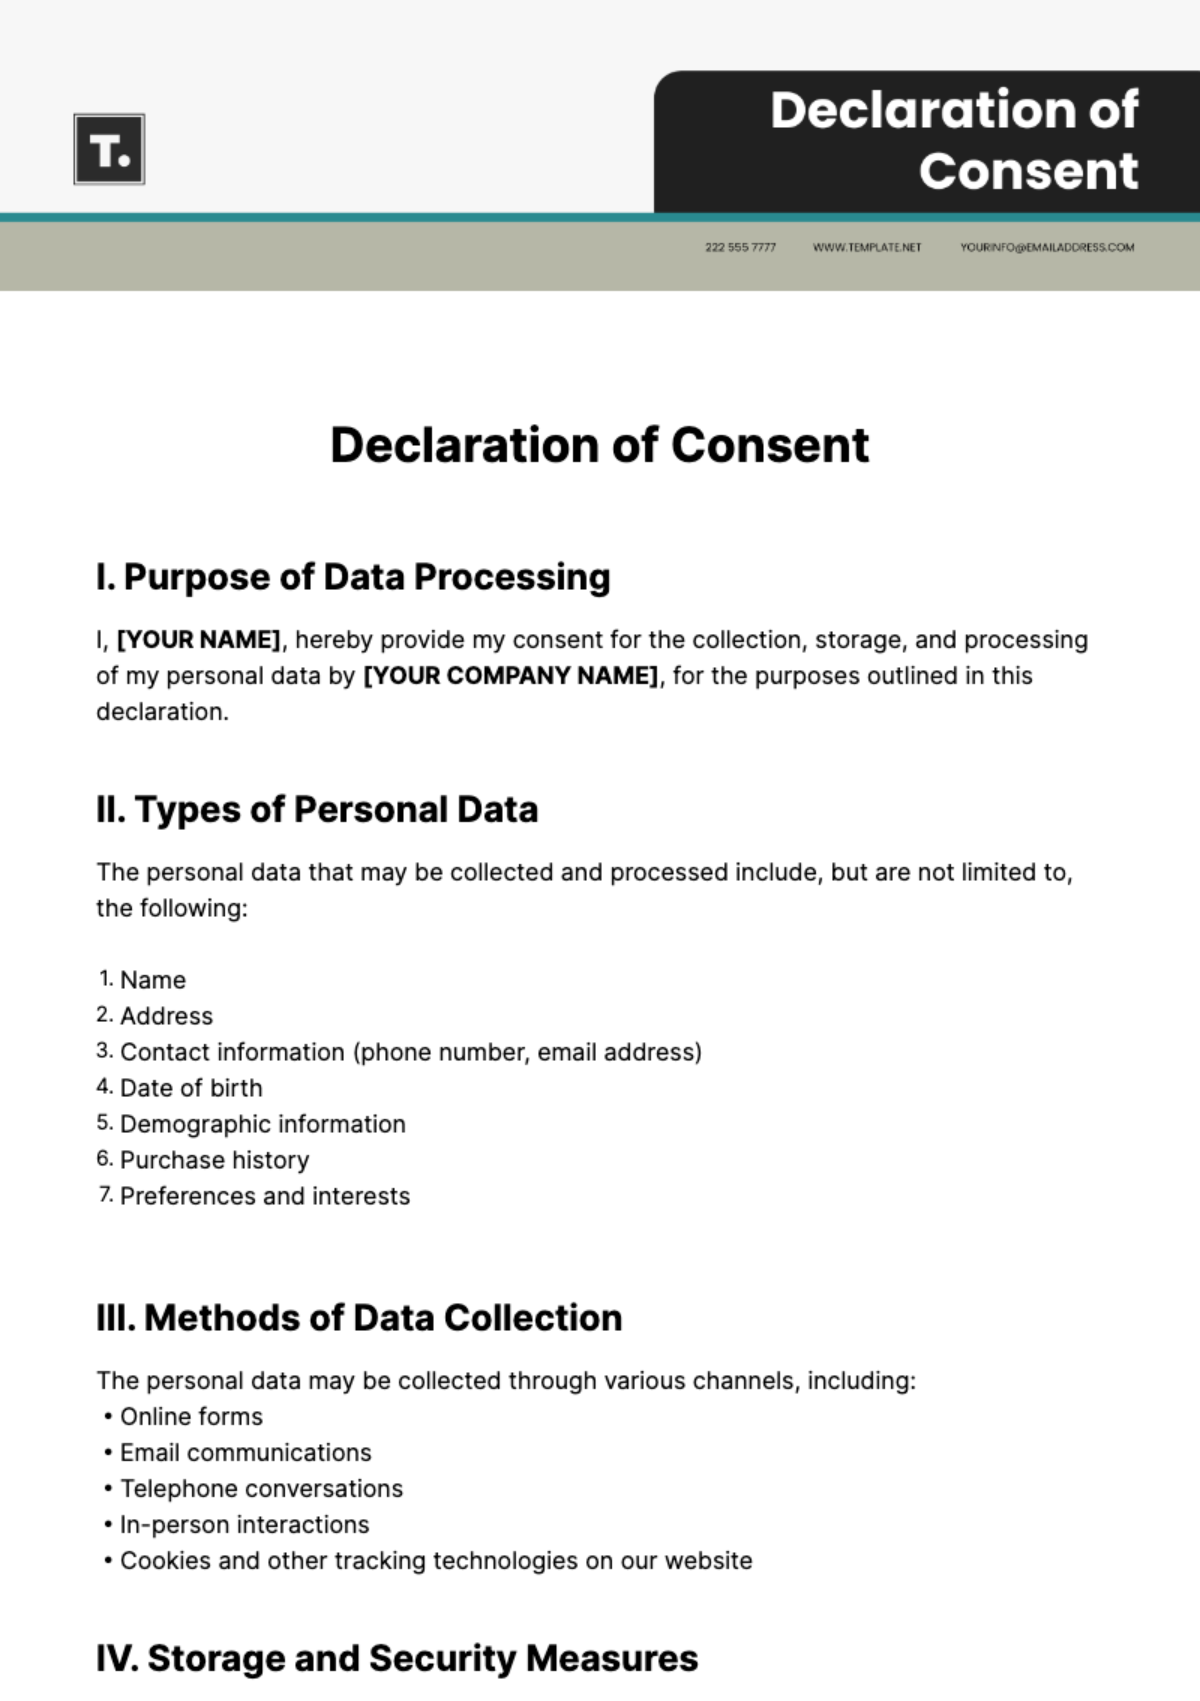 Declaration of Consent Template